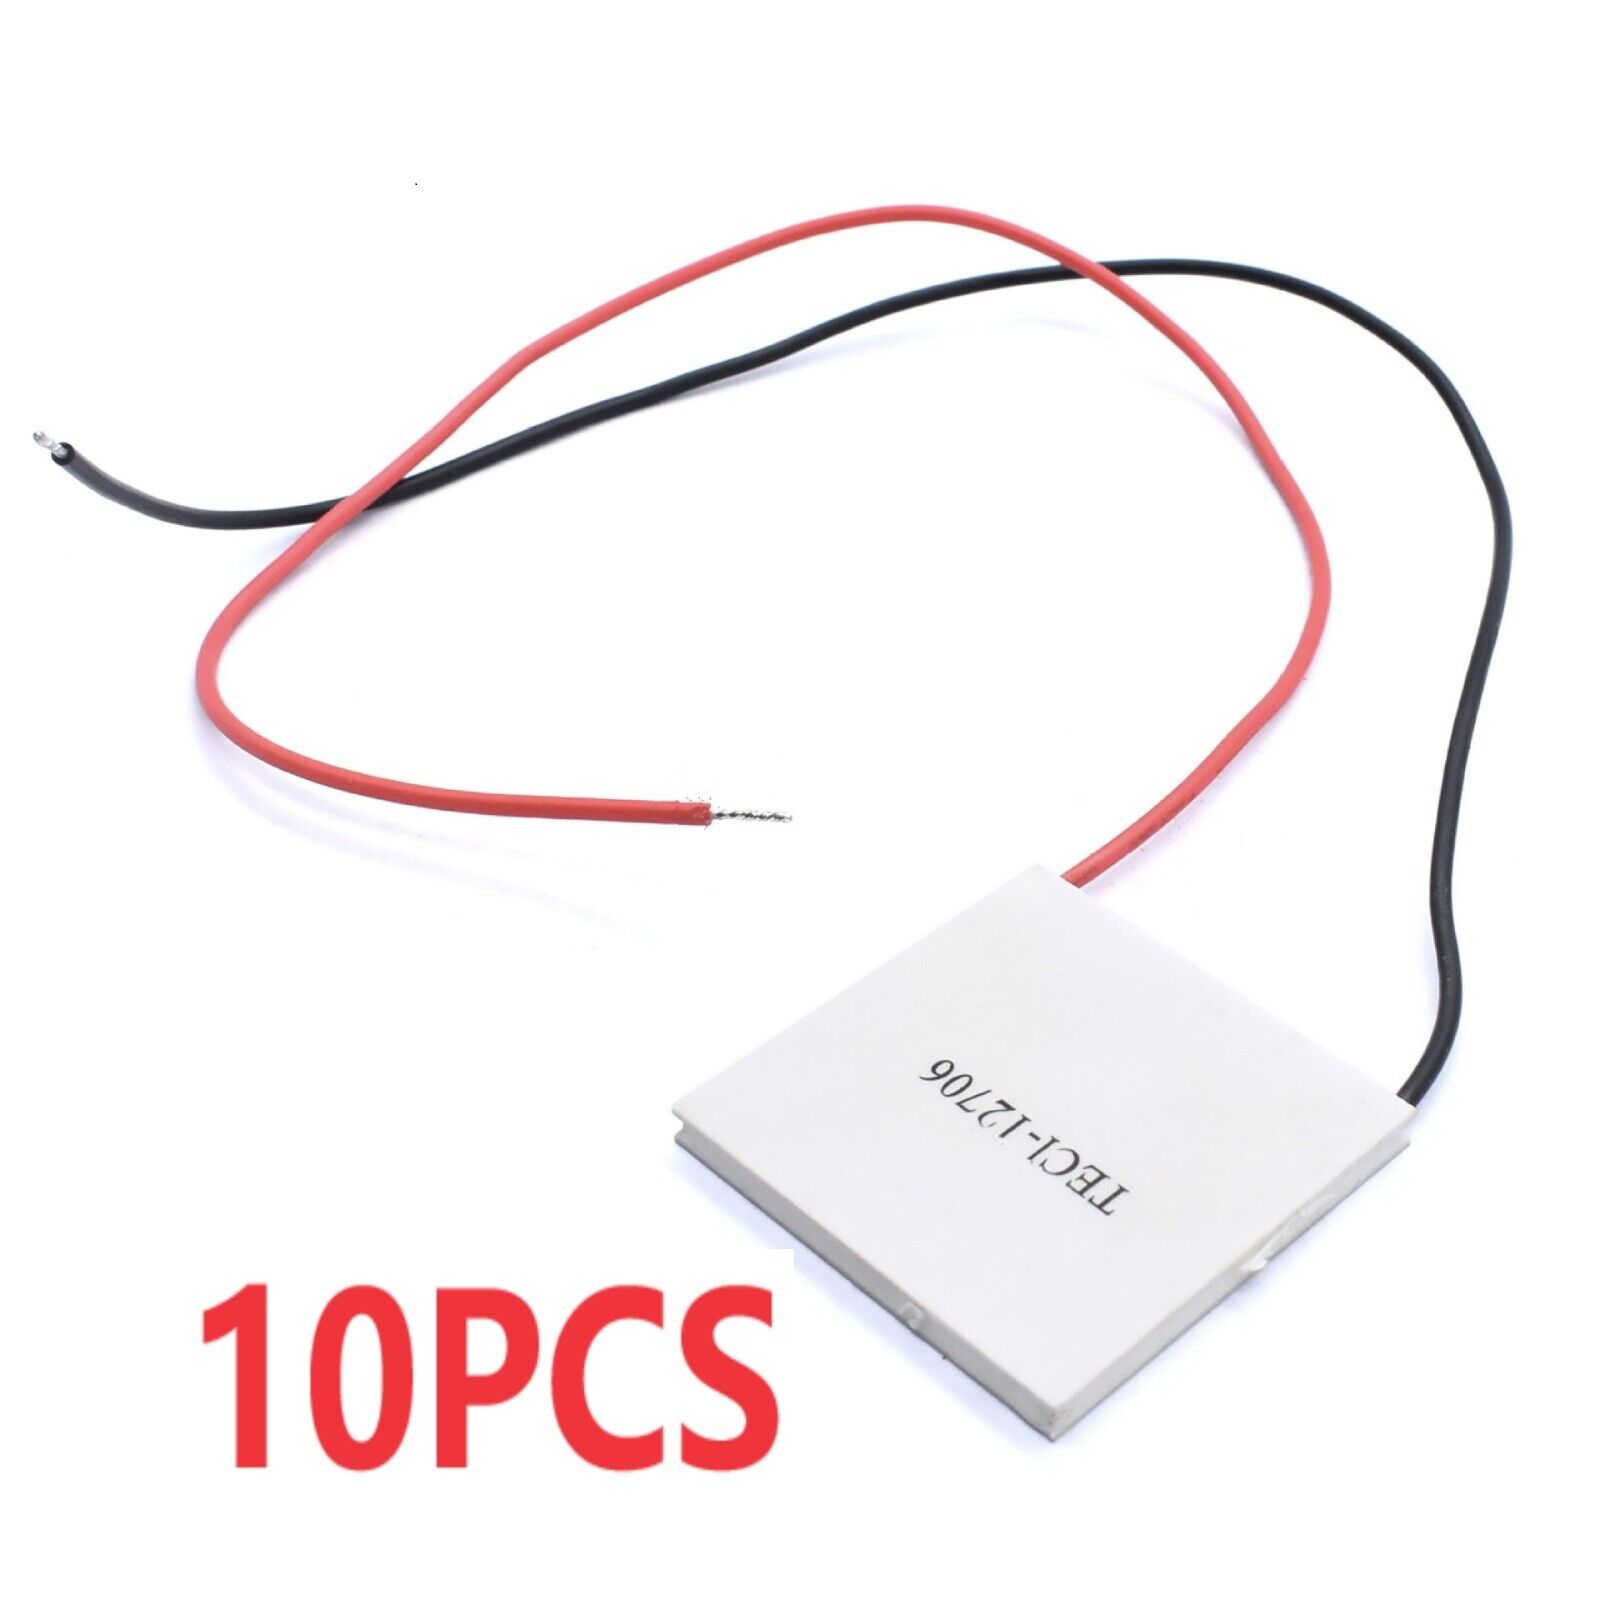 10x 12V TEC1 12706 Heatsink Thermoelectric Cooler Cooling Peltier Plate Module a